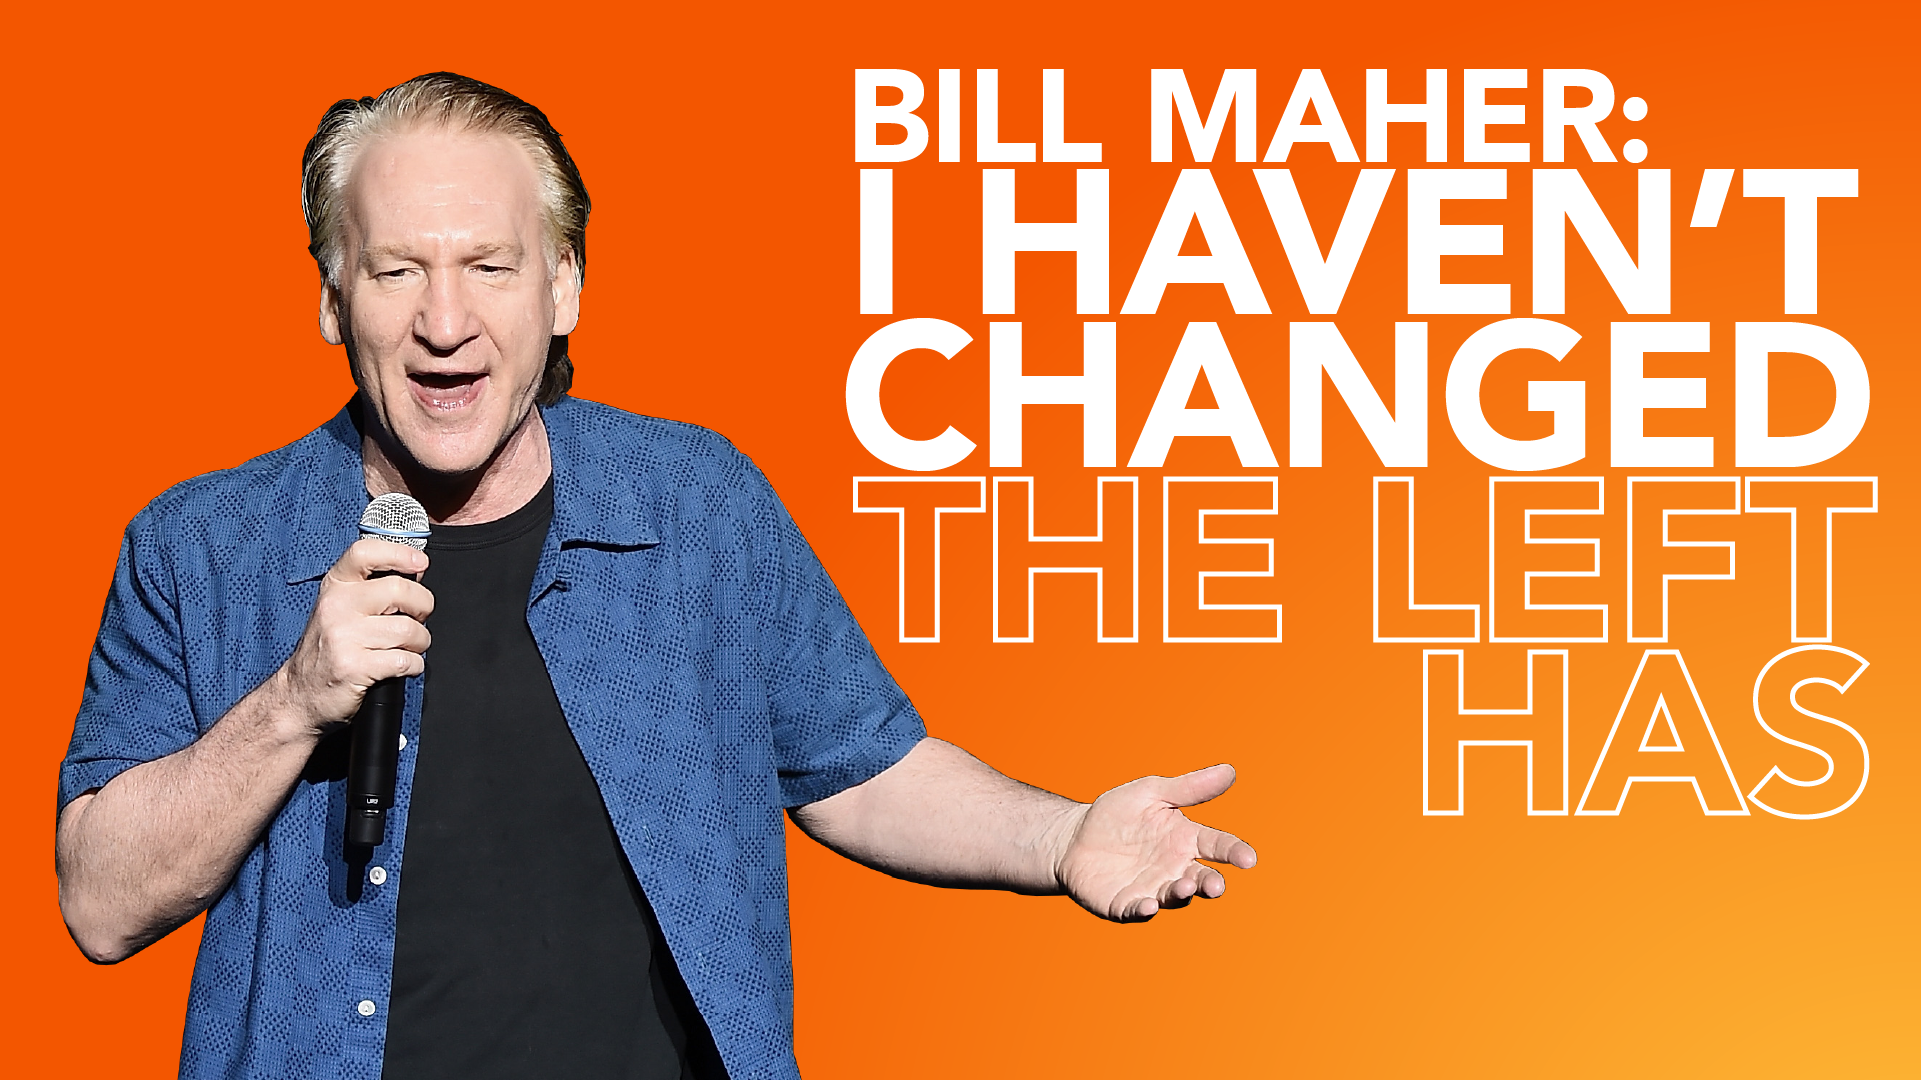 Bill Maher: I Haven’t Changed, the Left Has